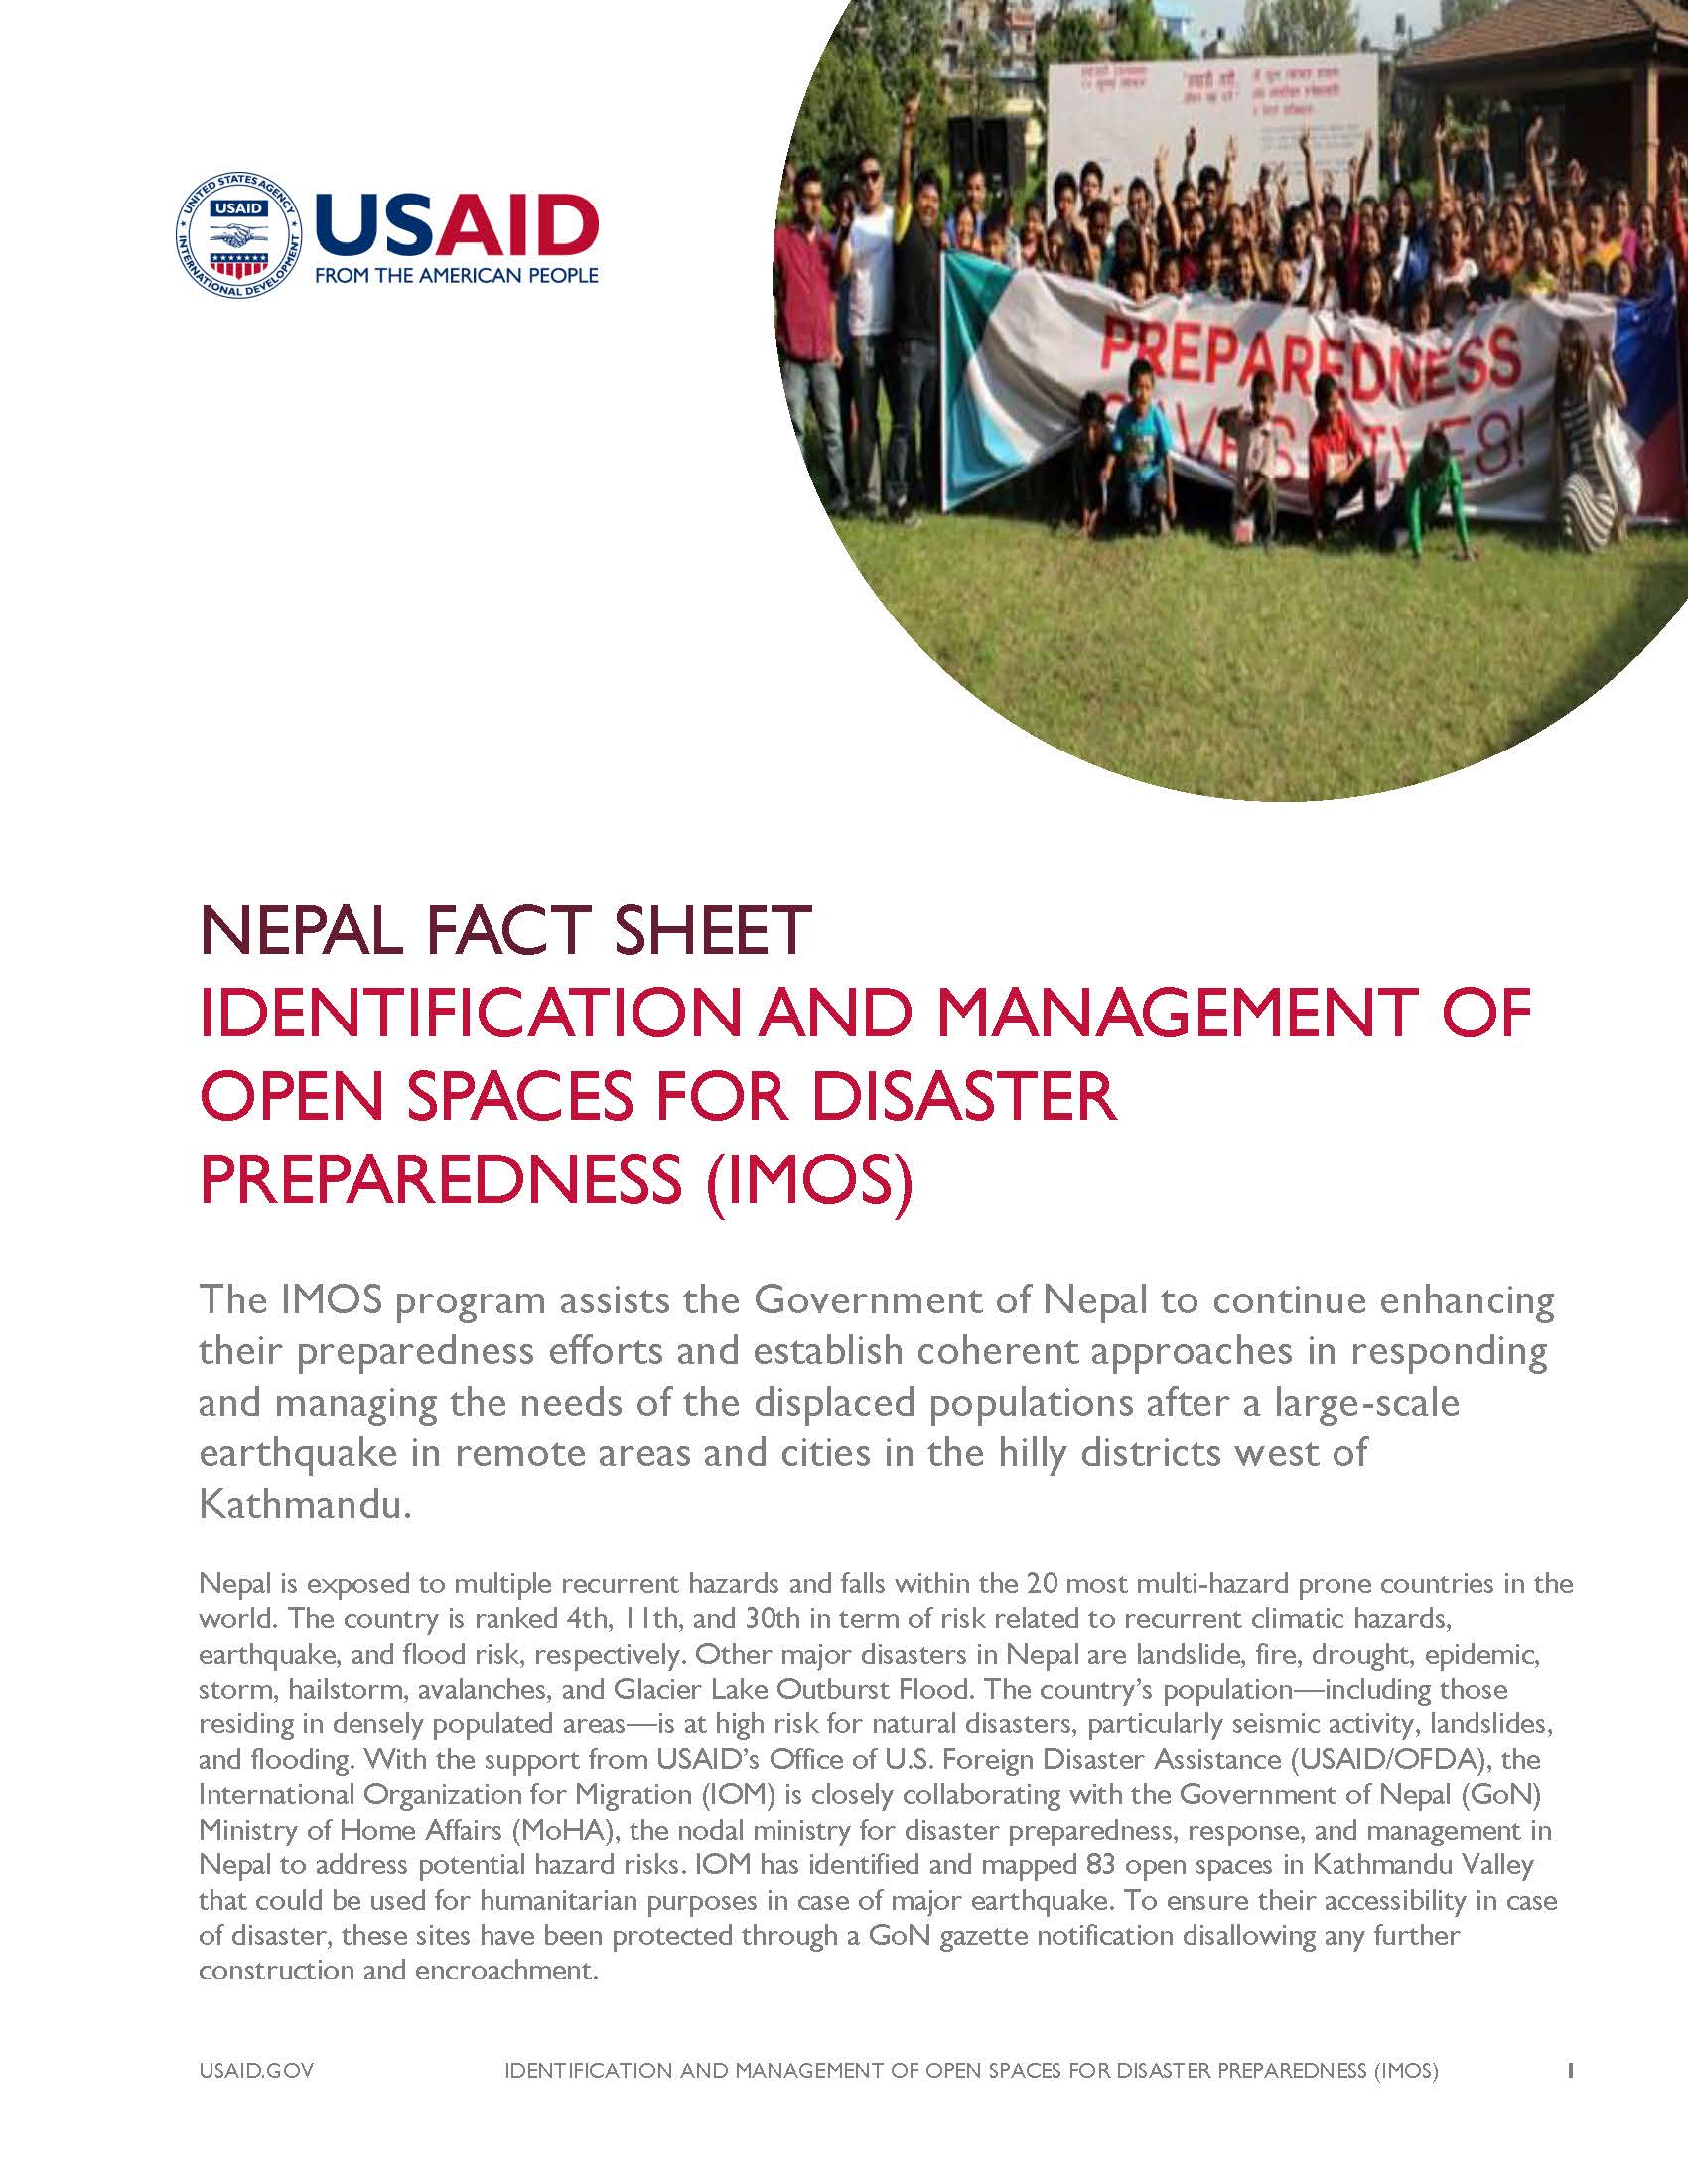 Fact Sheet: IDENTIFICATION AND MANAGEMENT OF OPEN SPACES FOR DISASTER PREPAREDNESS (IMOS)